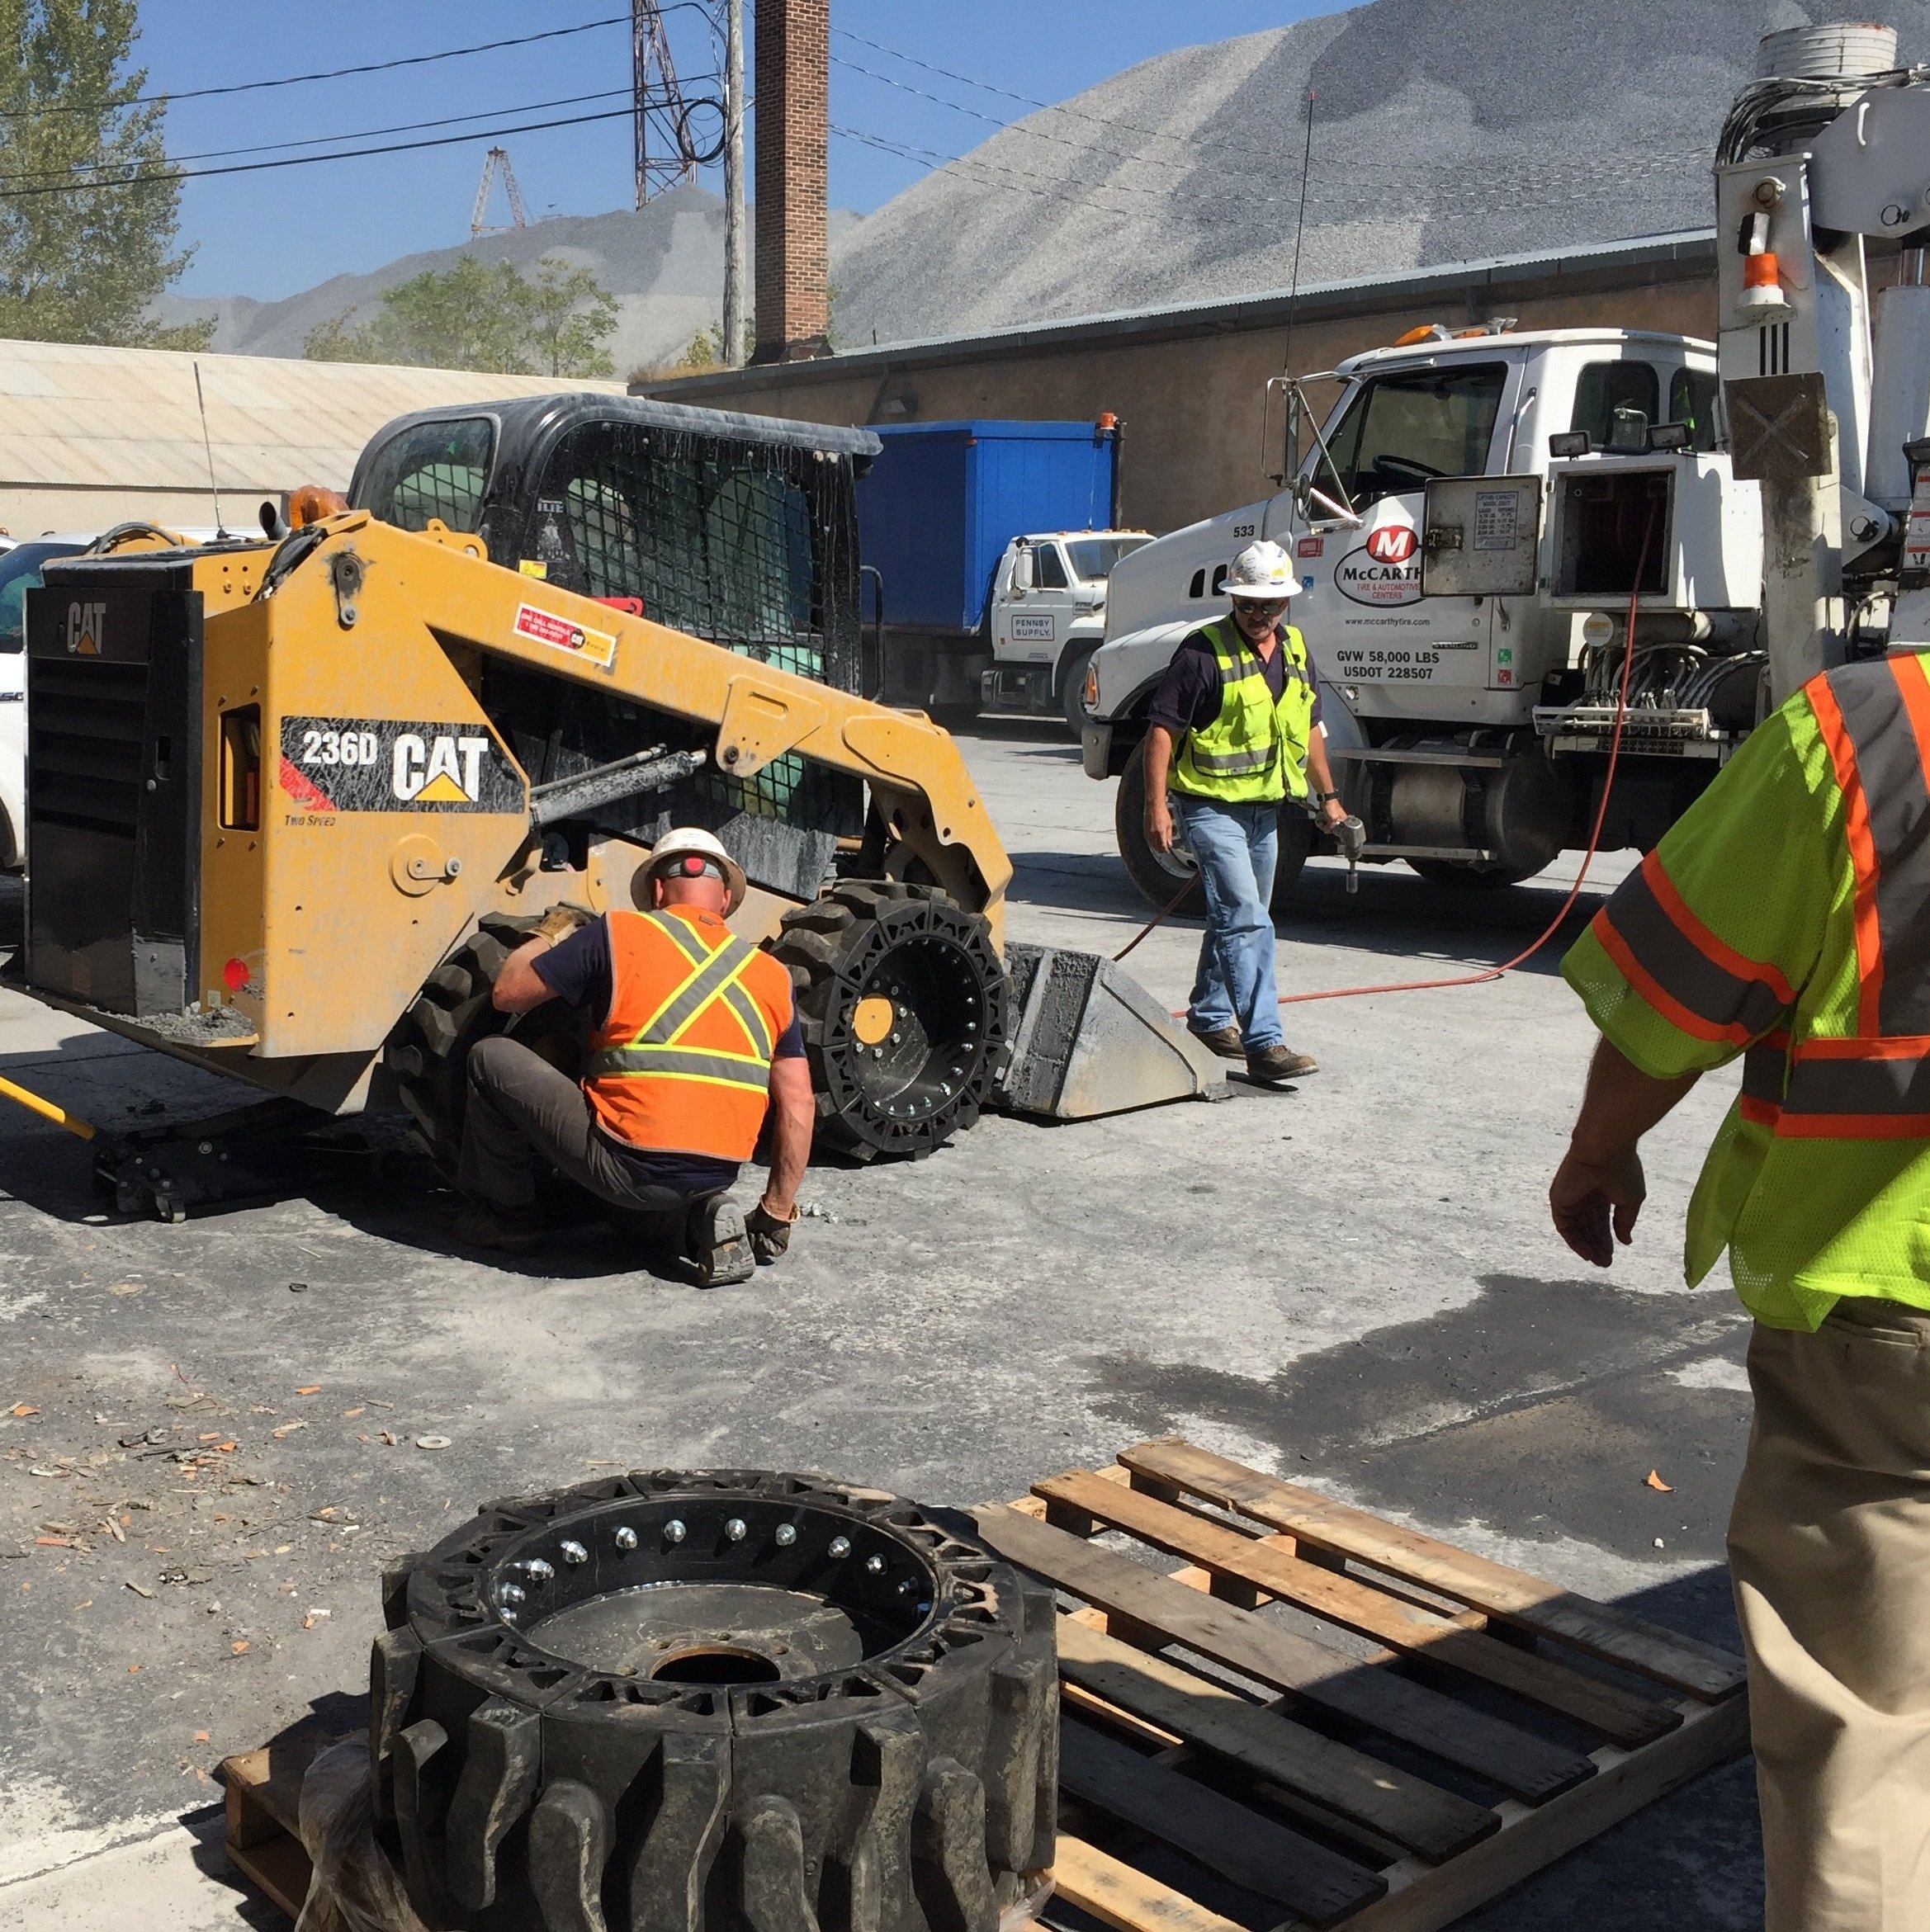 The image shows workers fixing a flat and switching over to our EWRS-AT solid skid steer tires.